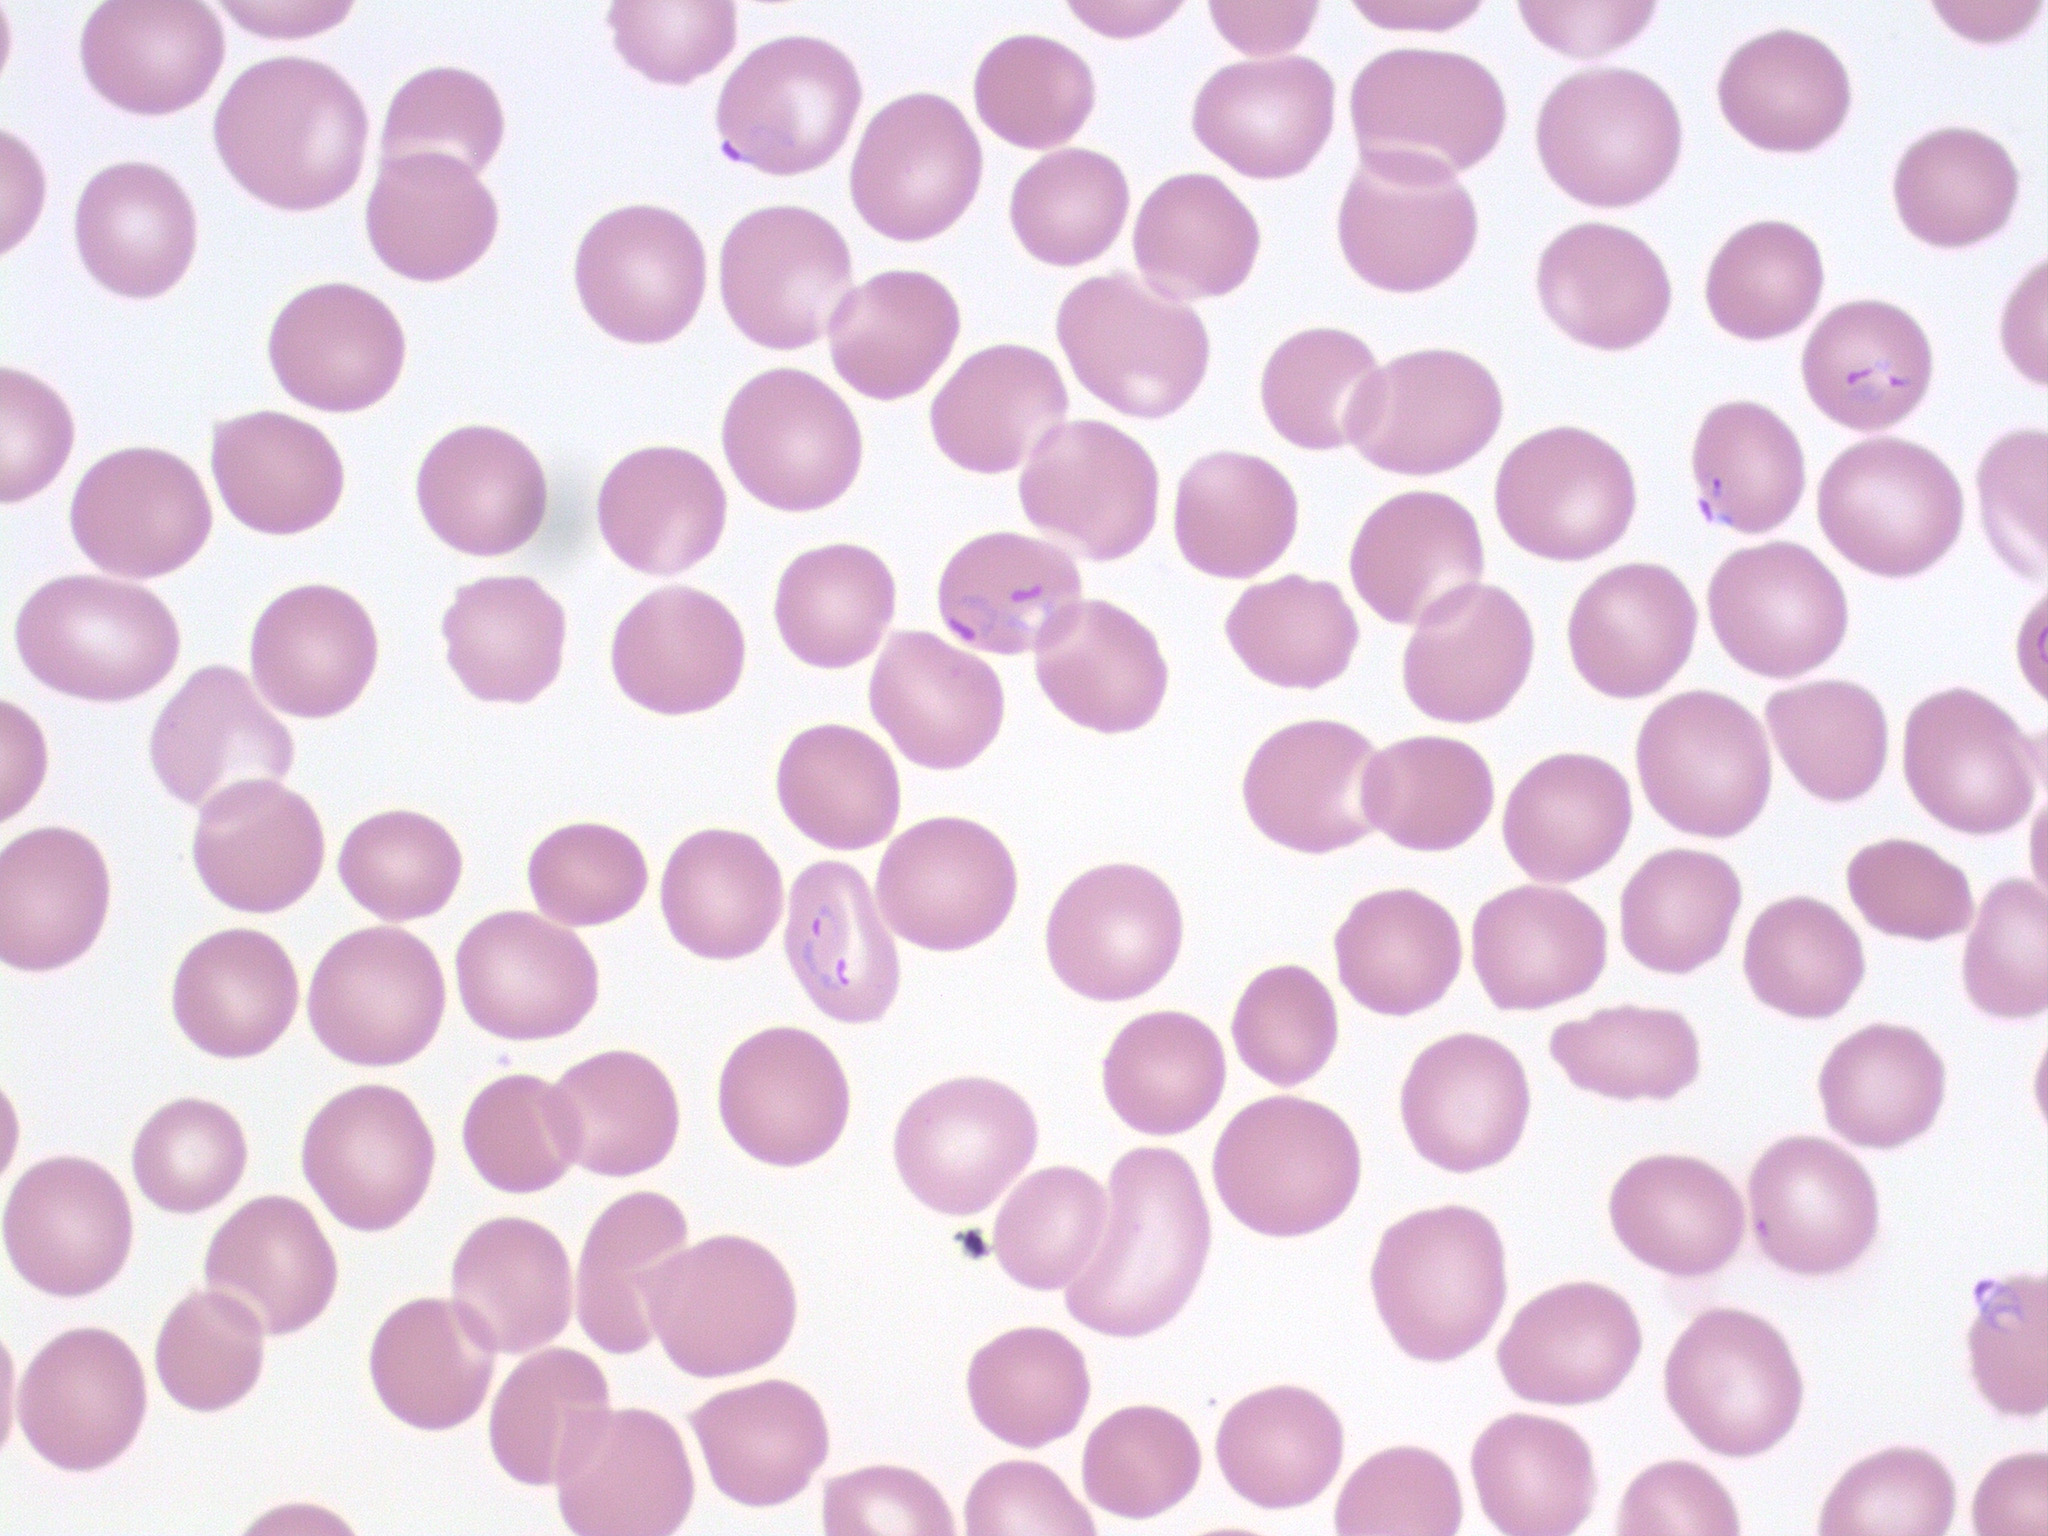 Red Blood Cell Infected with Malaria Parasite Plasmodium Vivax, Ring Stage  Stock Illustration - Illustration of infectious, illness: 159917951